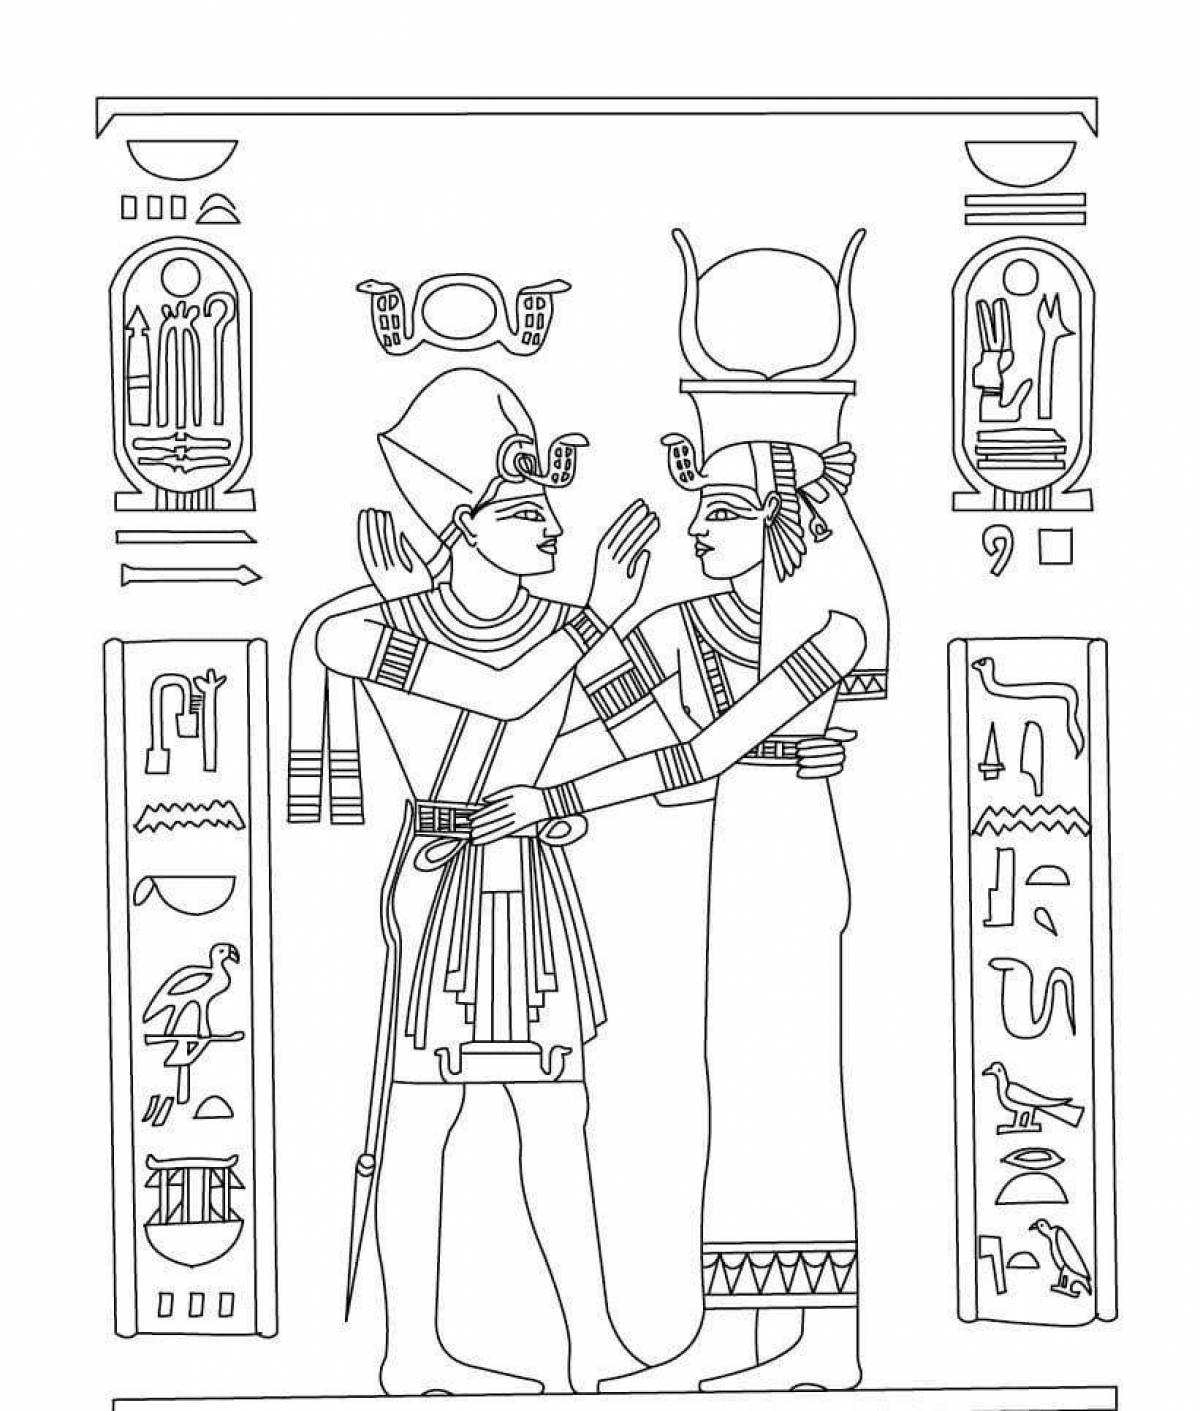 Incredible ancient egypt coloring book for kids